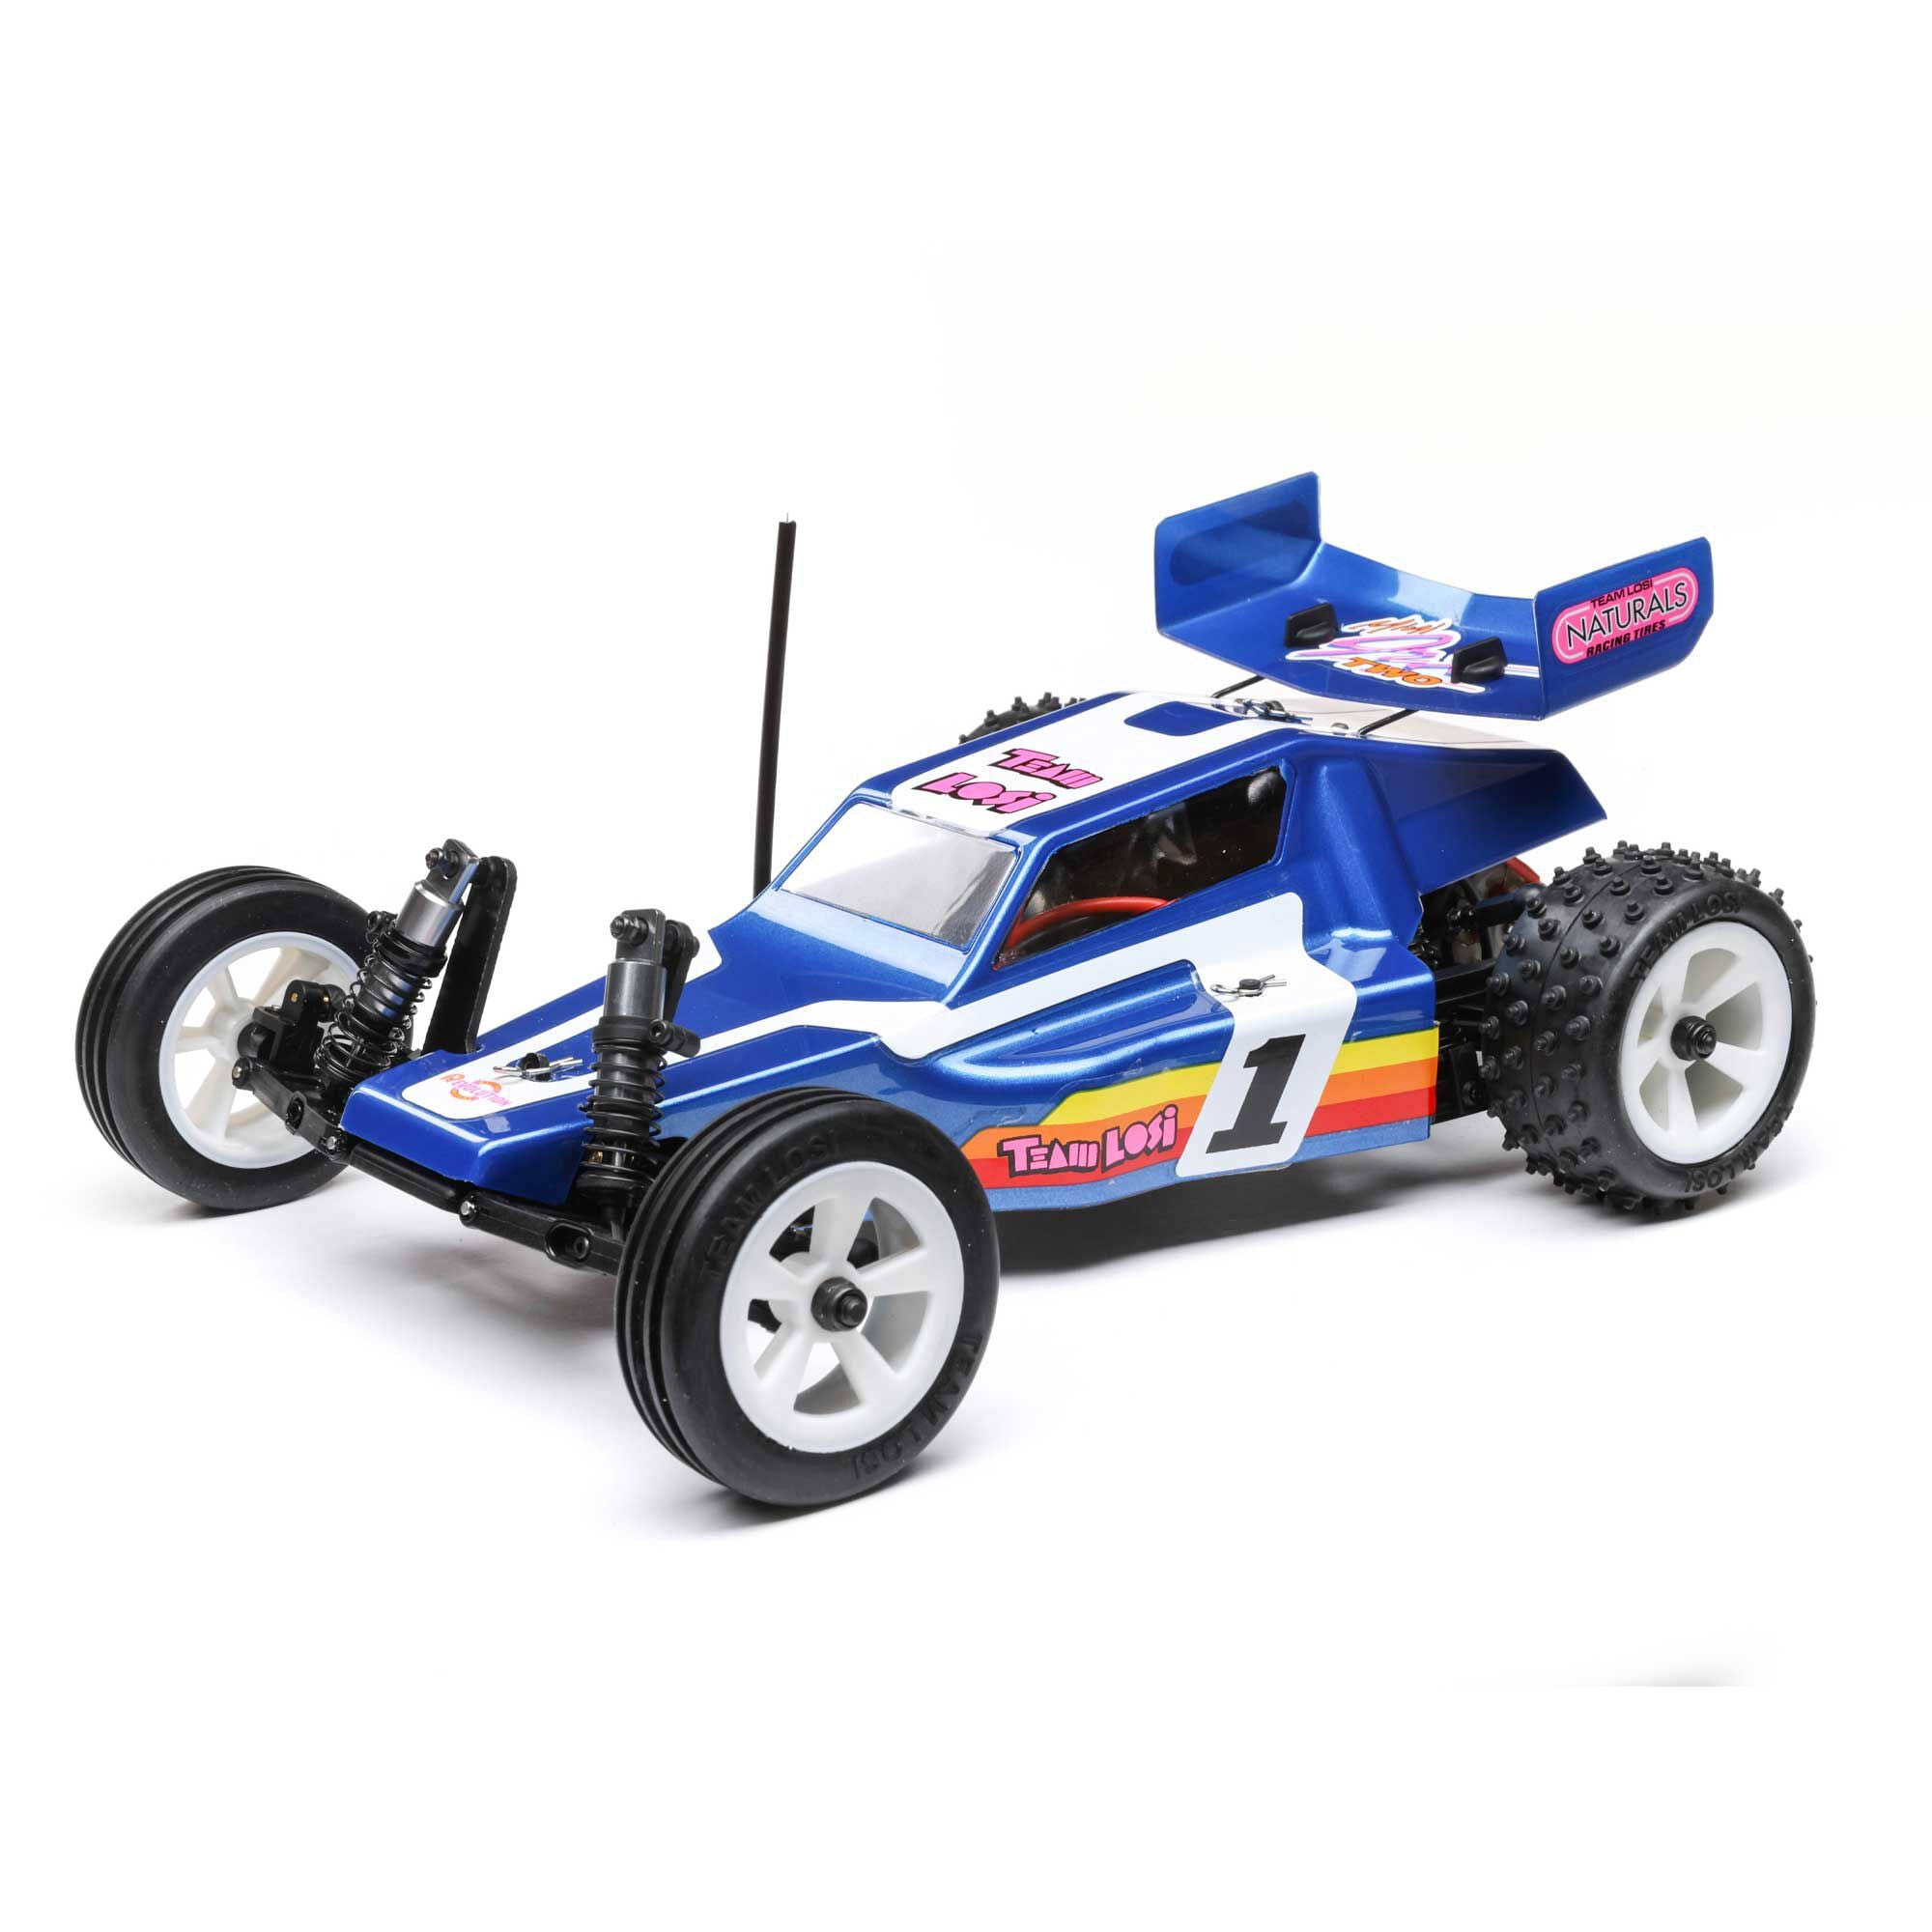 Losi 1/16 Mini JRX2 2WD Buggy Brushed RTR, Blue LOS01020T2